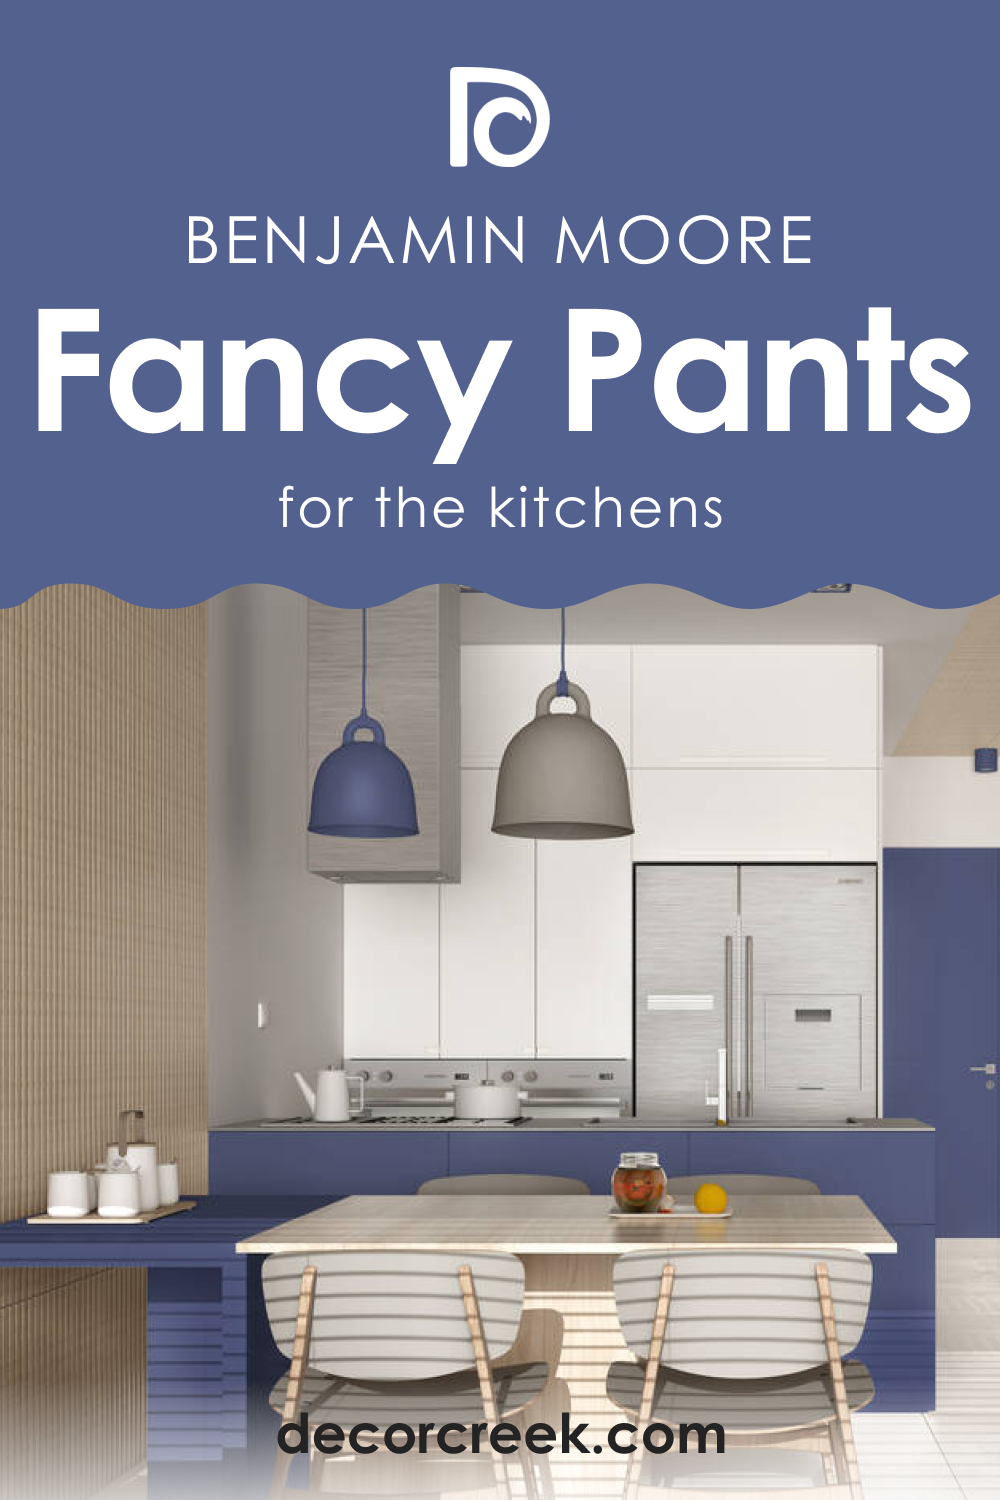 How to Use Fancy Pants CSP-525 in the Kitchen?